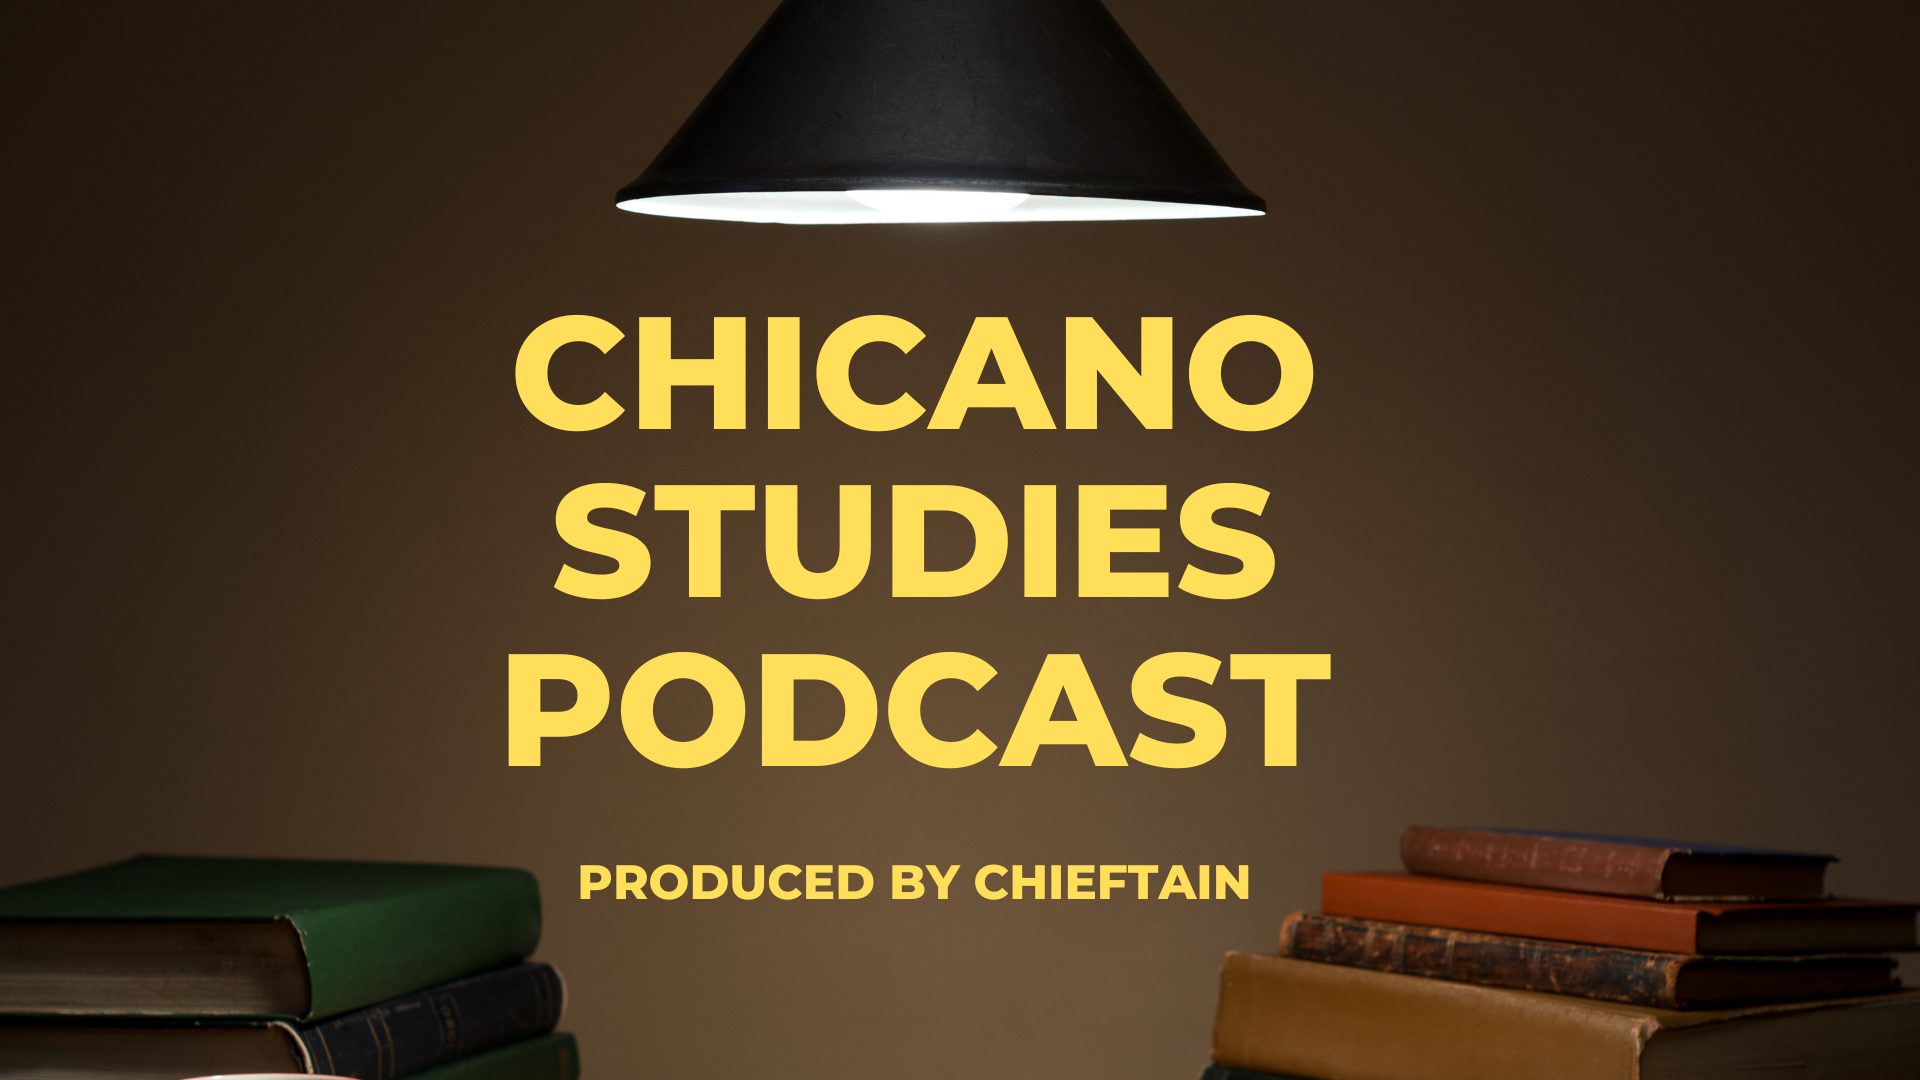 PODCAST: City College students share their stories, perspectives on Chicano Studies Podcast